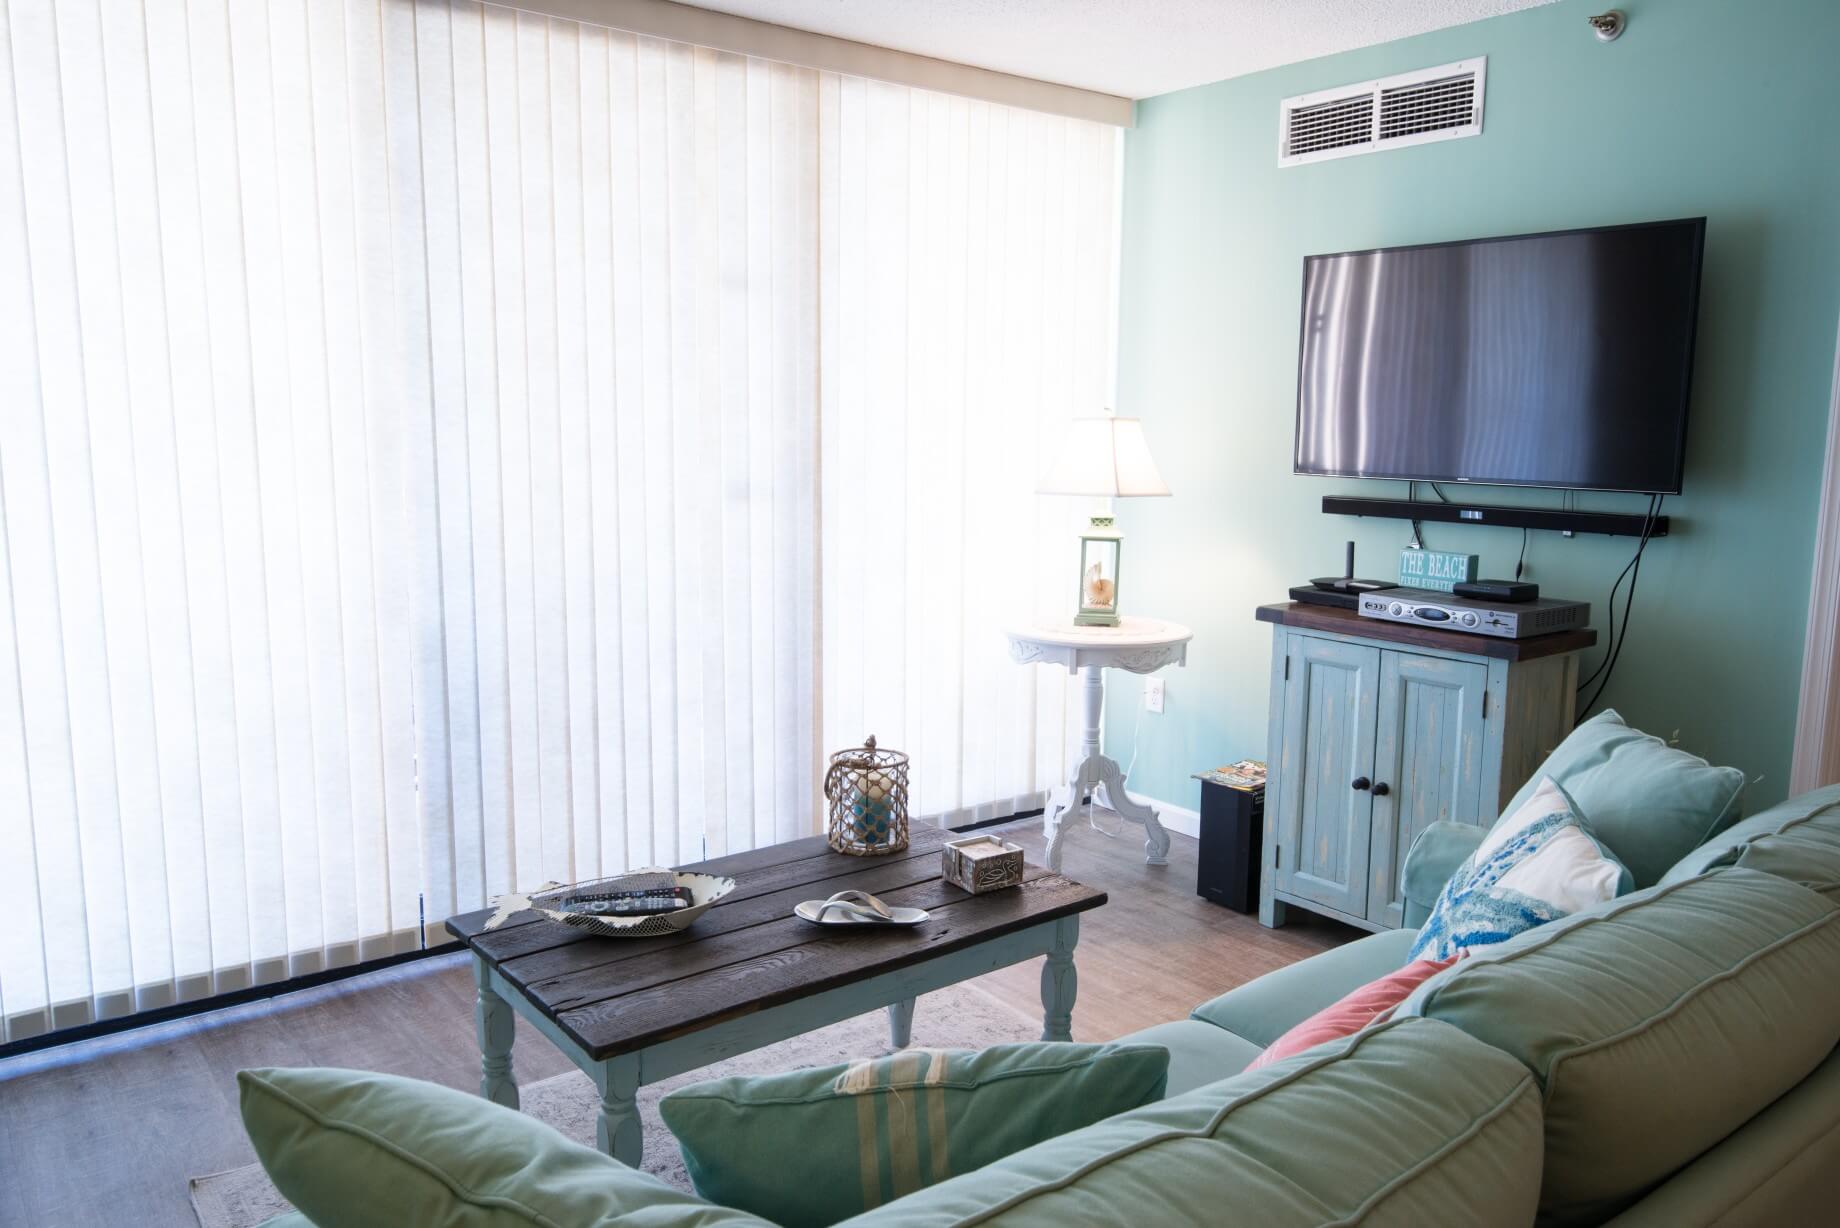 Sea Colony Condo Renovation Bethany Beach, DE Living Room with Turquoise Color Large Sofa and Dark Wood Floor